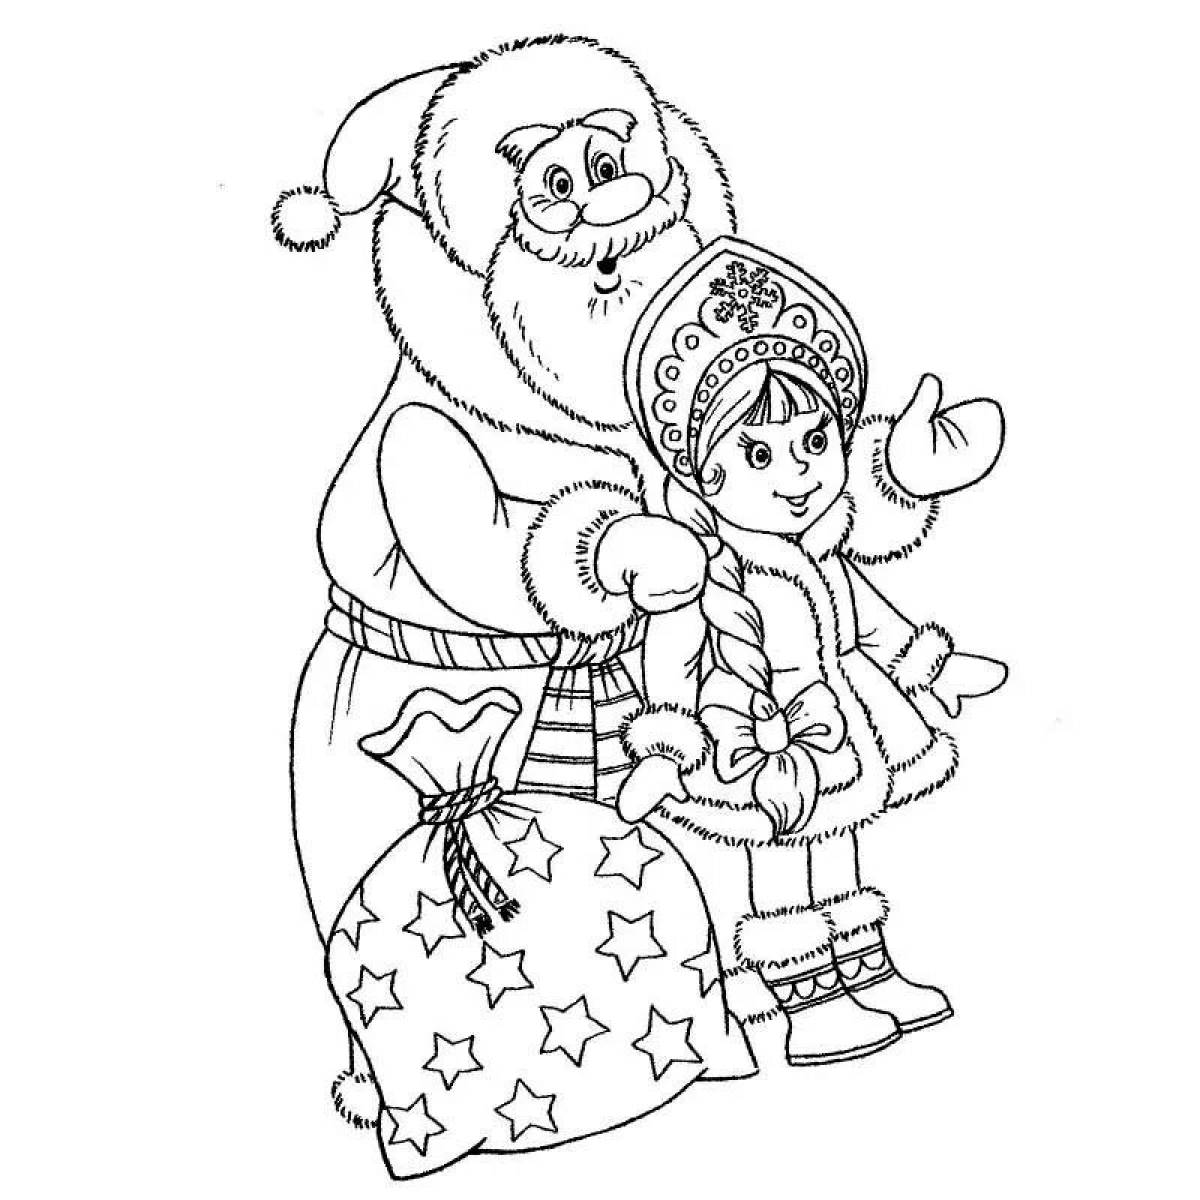 Coloring book merry Santa Claus and Snow Maiden